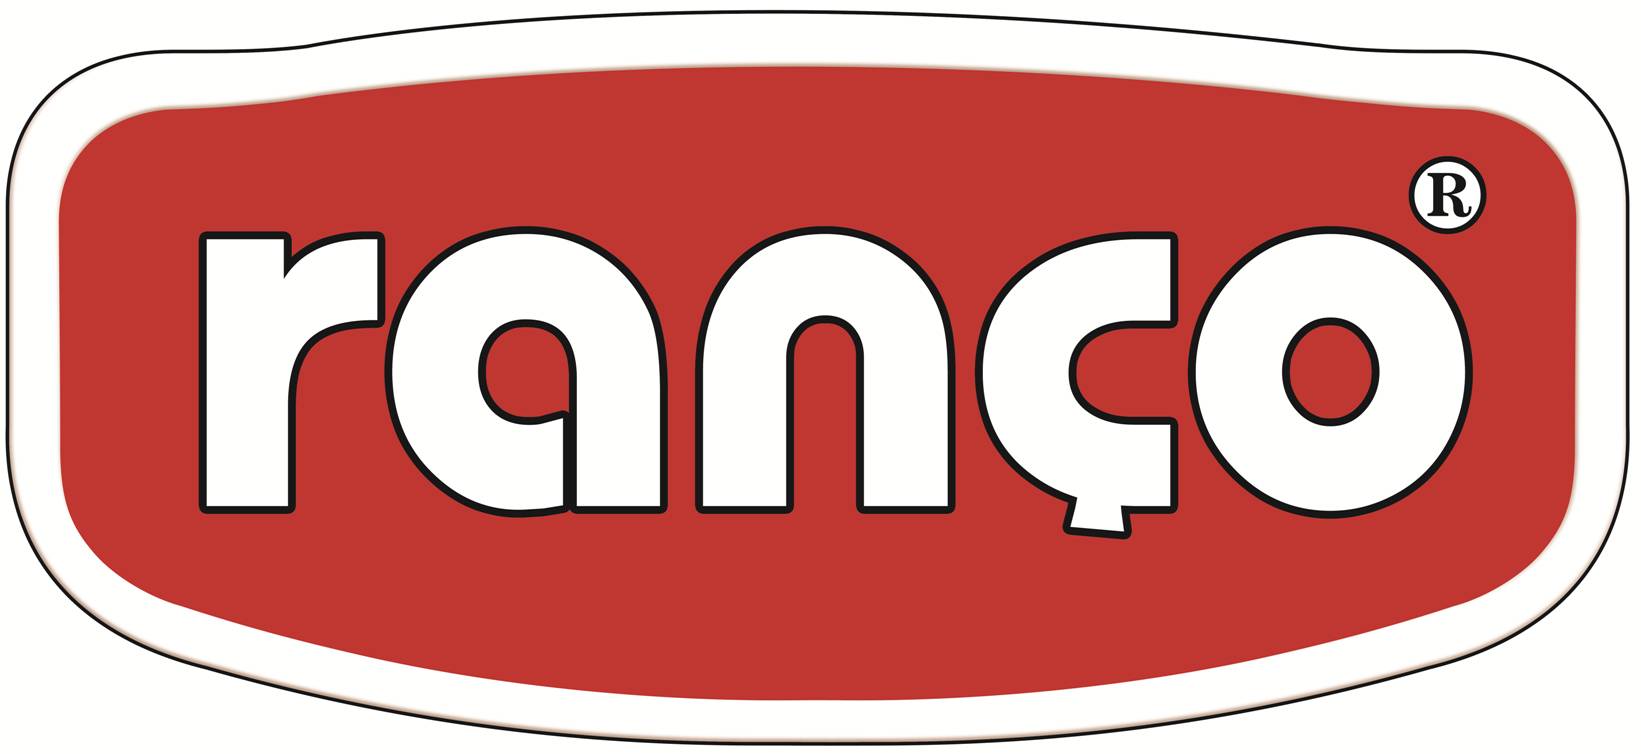 Ranco Nuts and Snacks